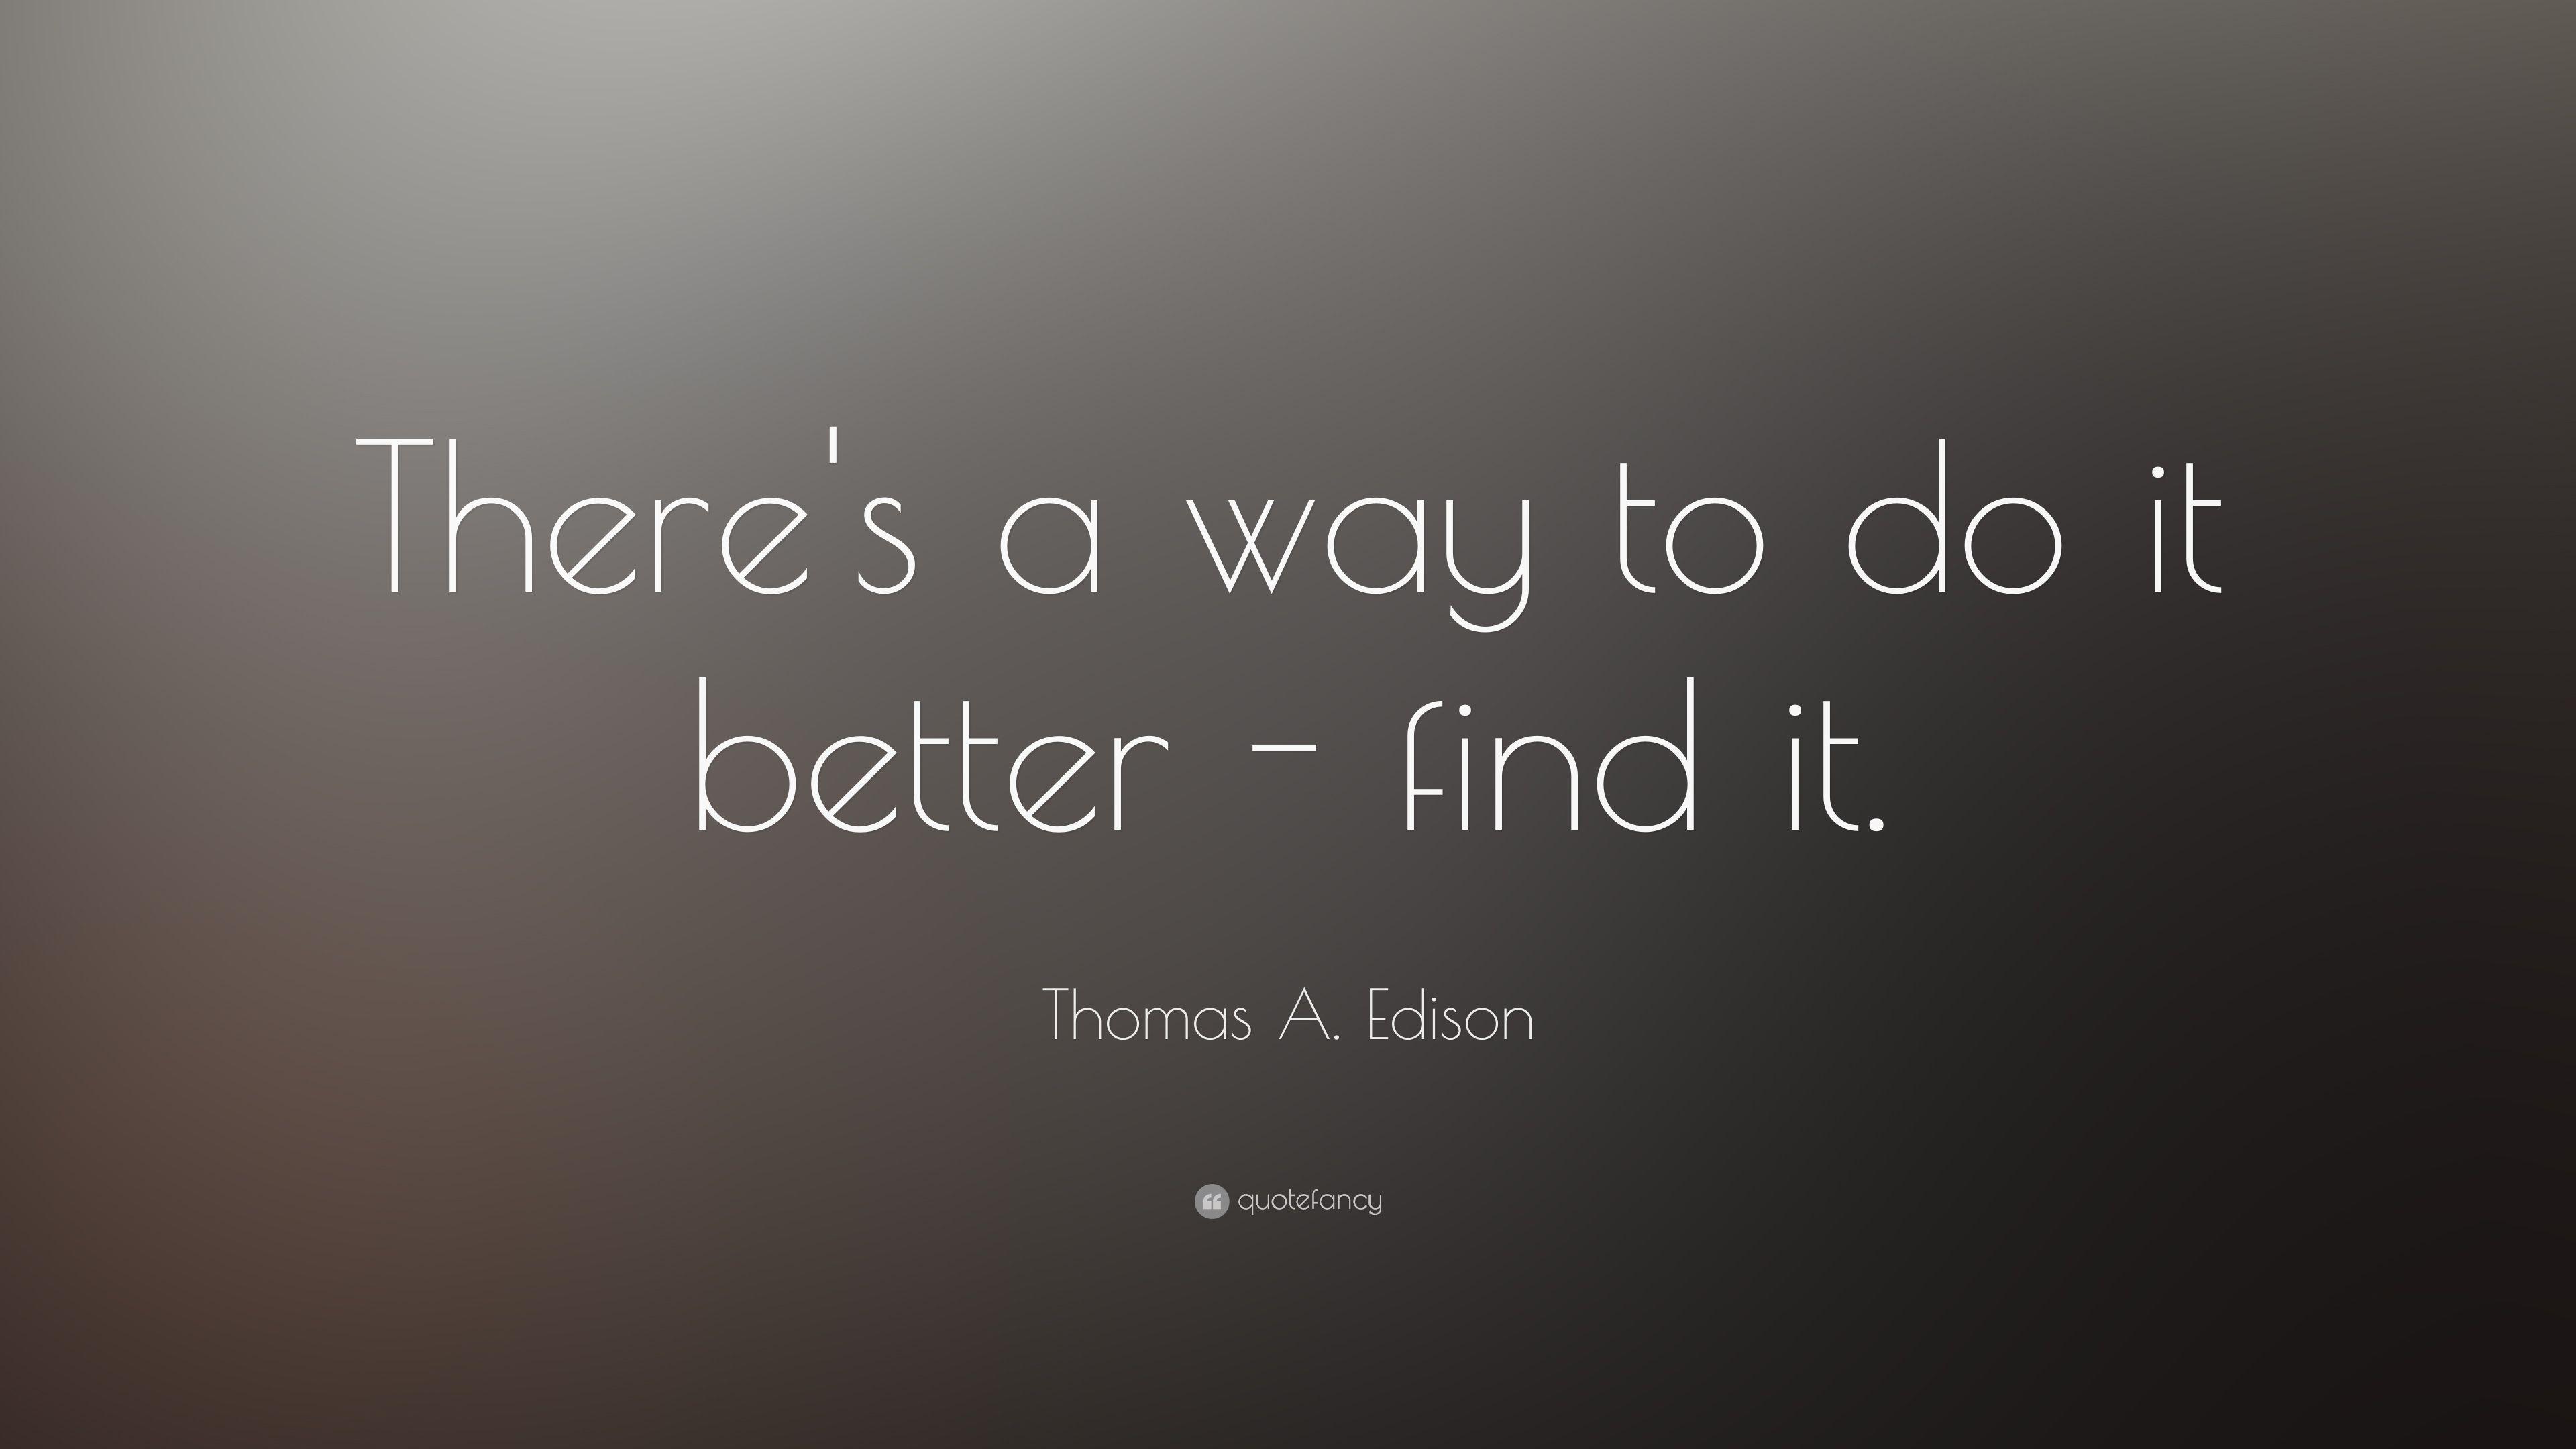 Thomas A. Edison Quote: “There's a way to do it better it